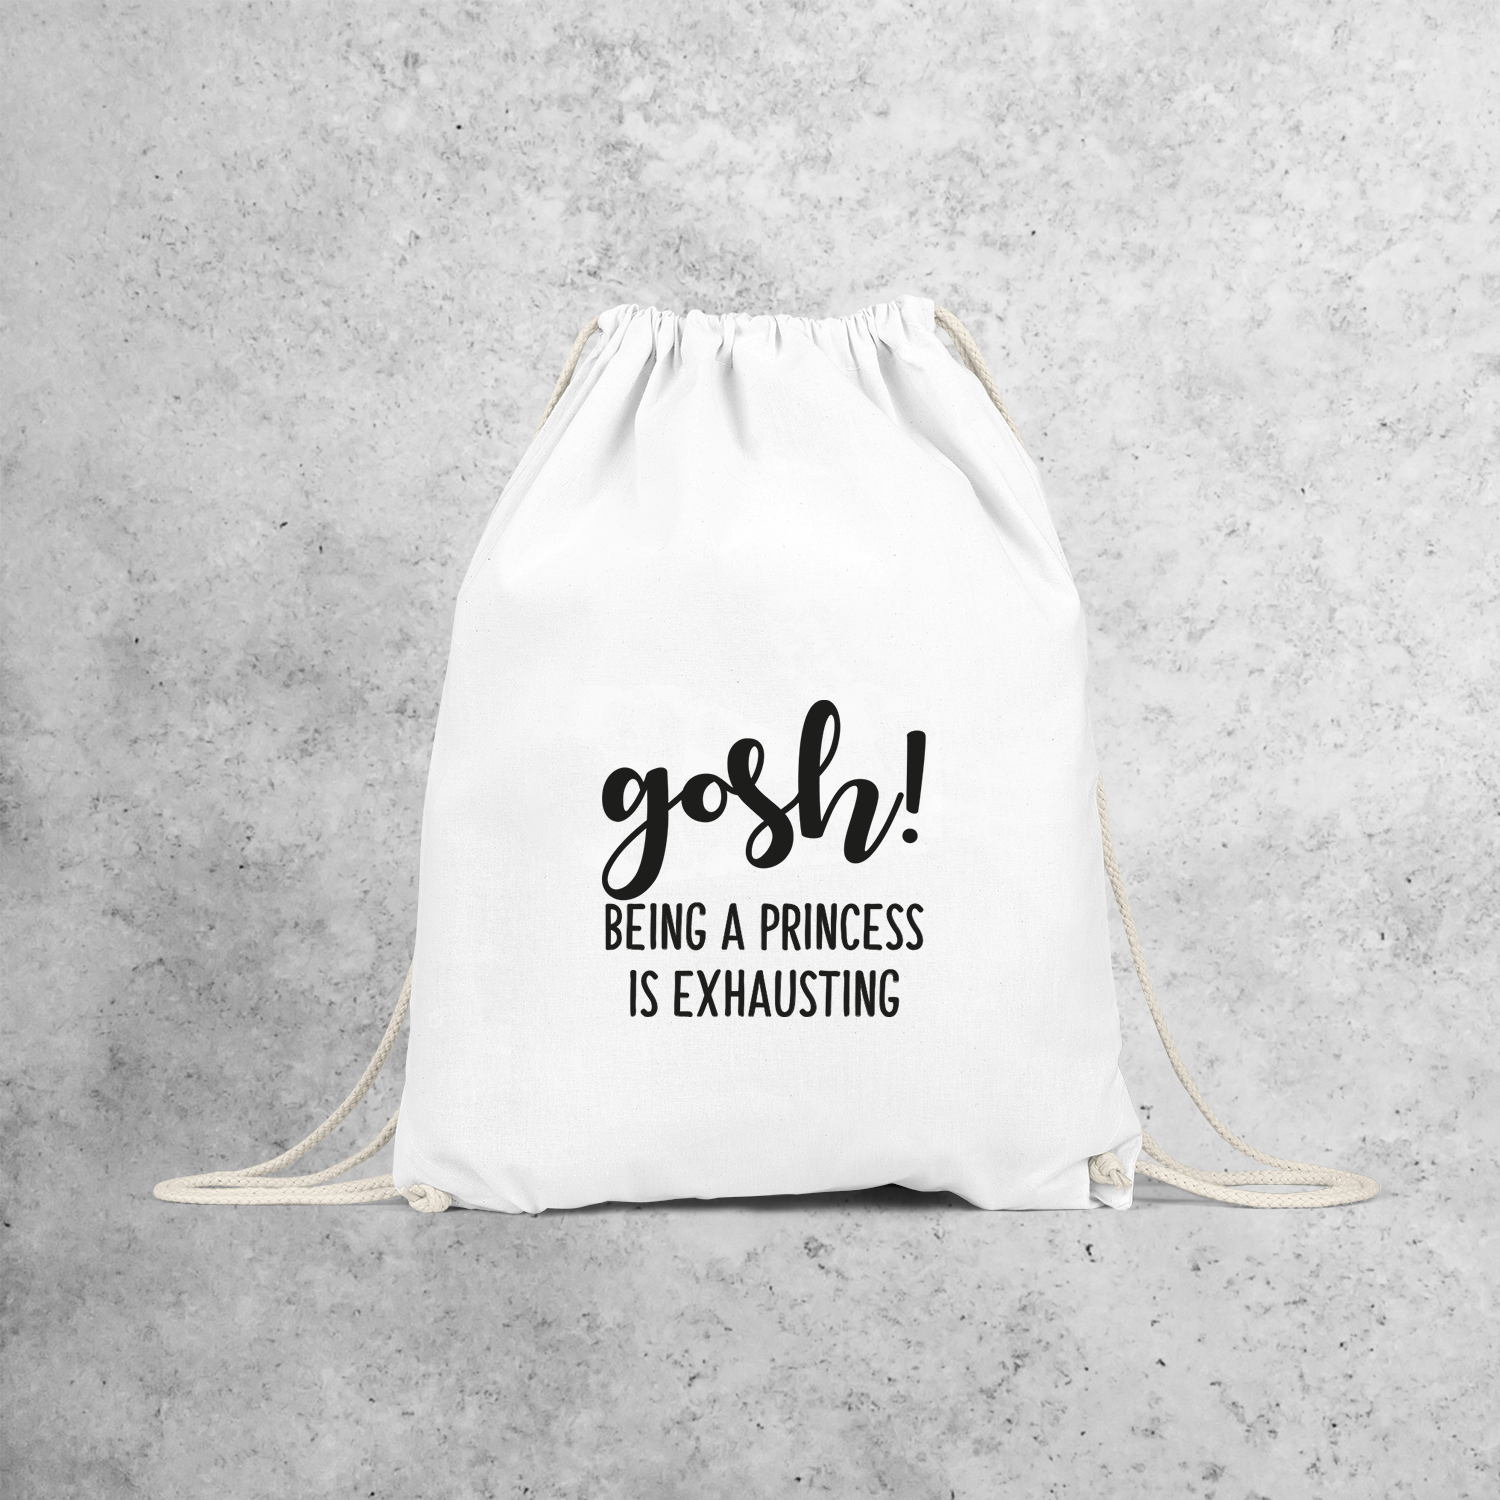 'Gosh! Being a princess is exhausting' backpack